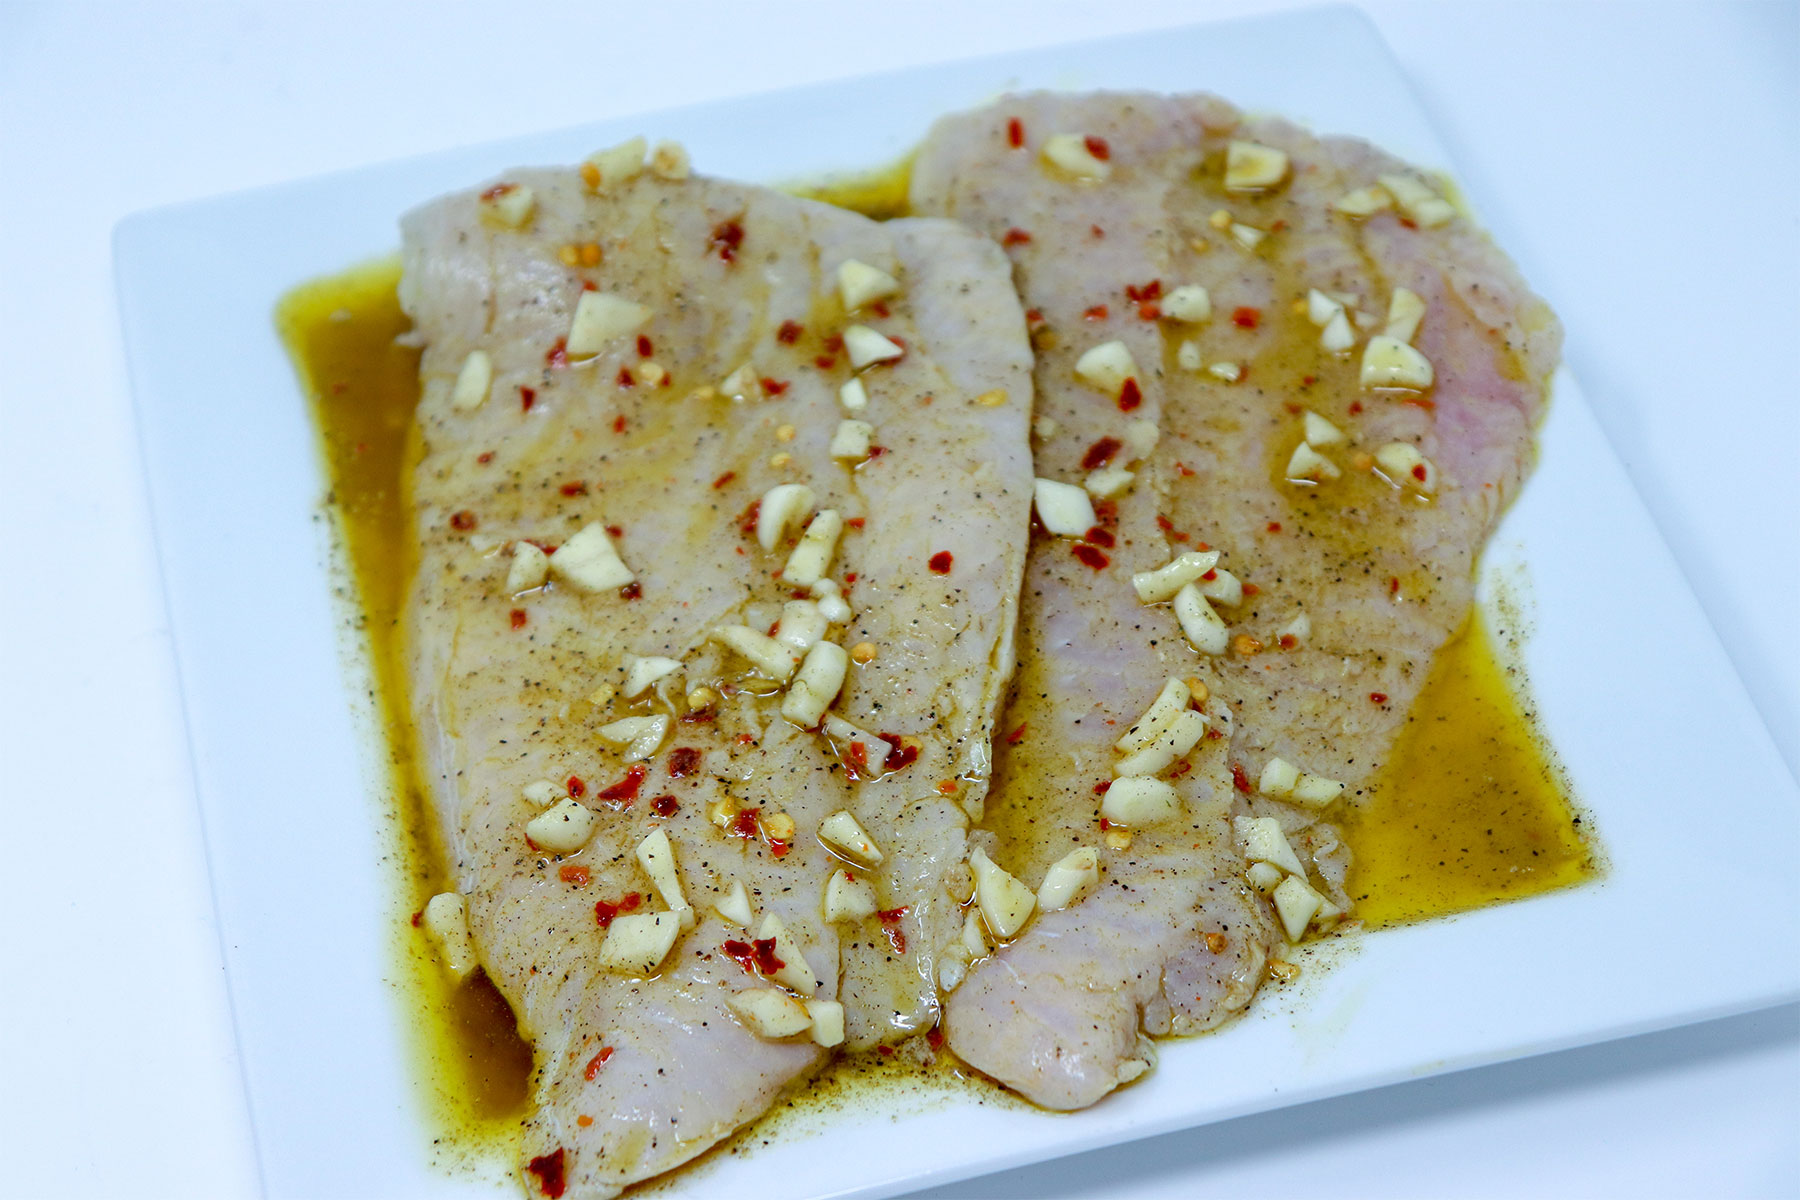 raw catfish fillets seasoned with oil, garlic and pepper